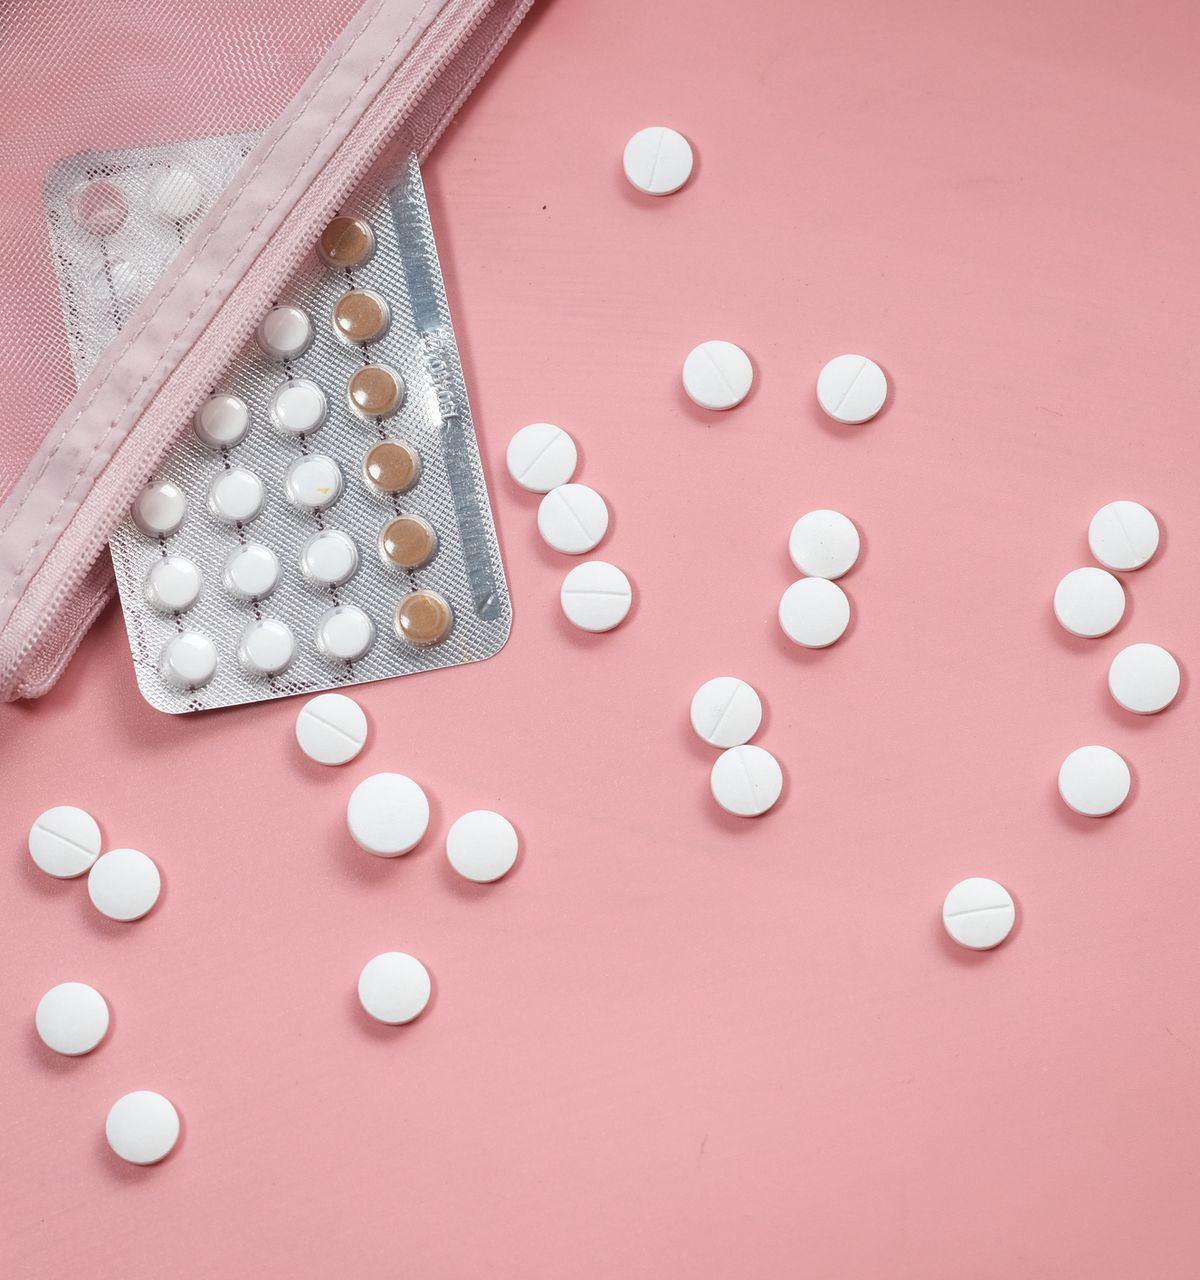 Birth control pills: What you should and shouldn't worry about